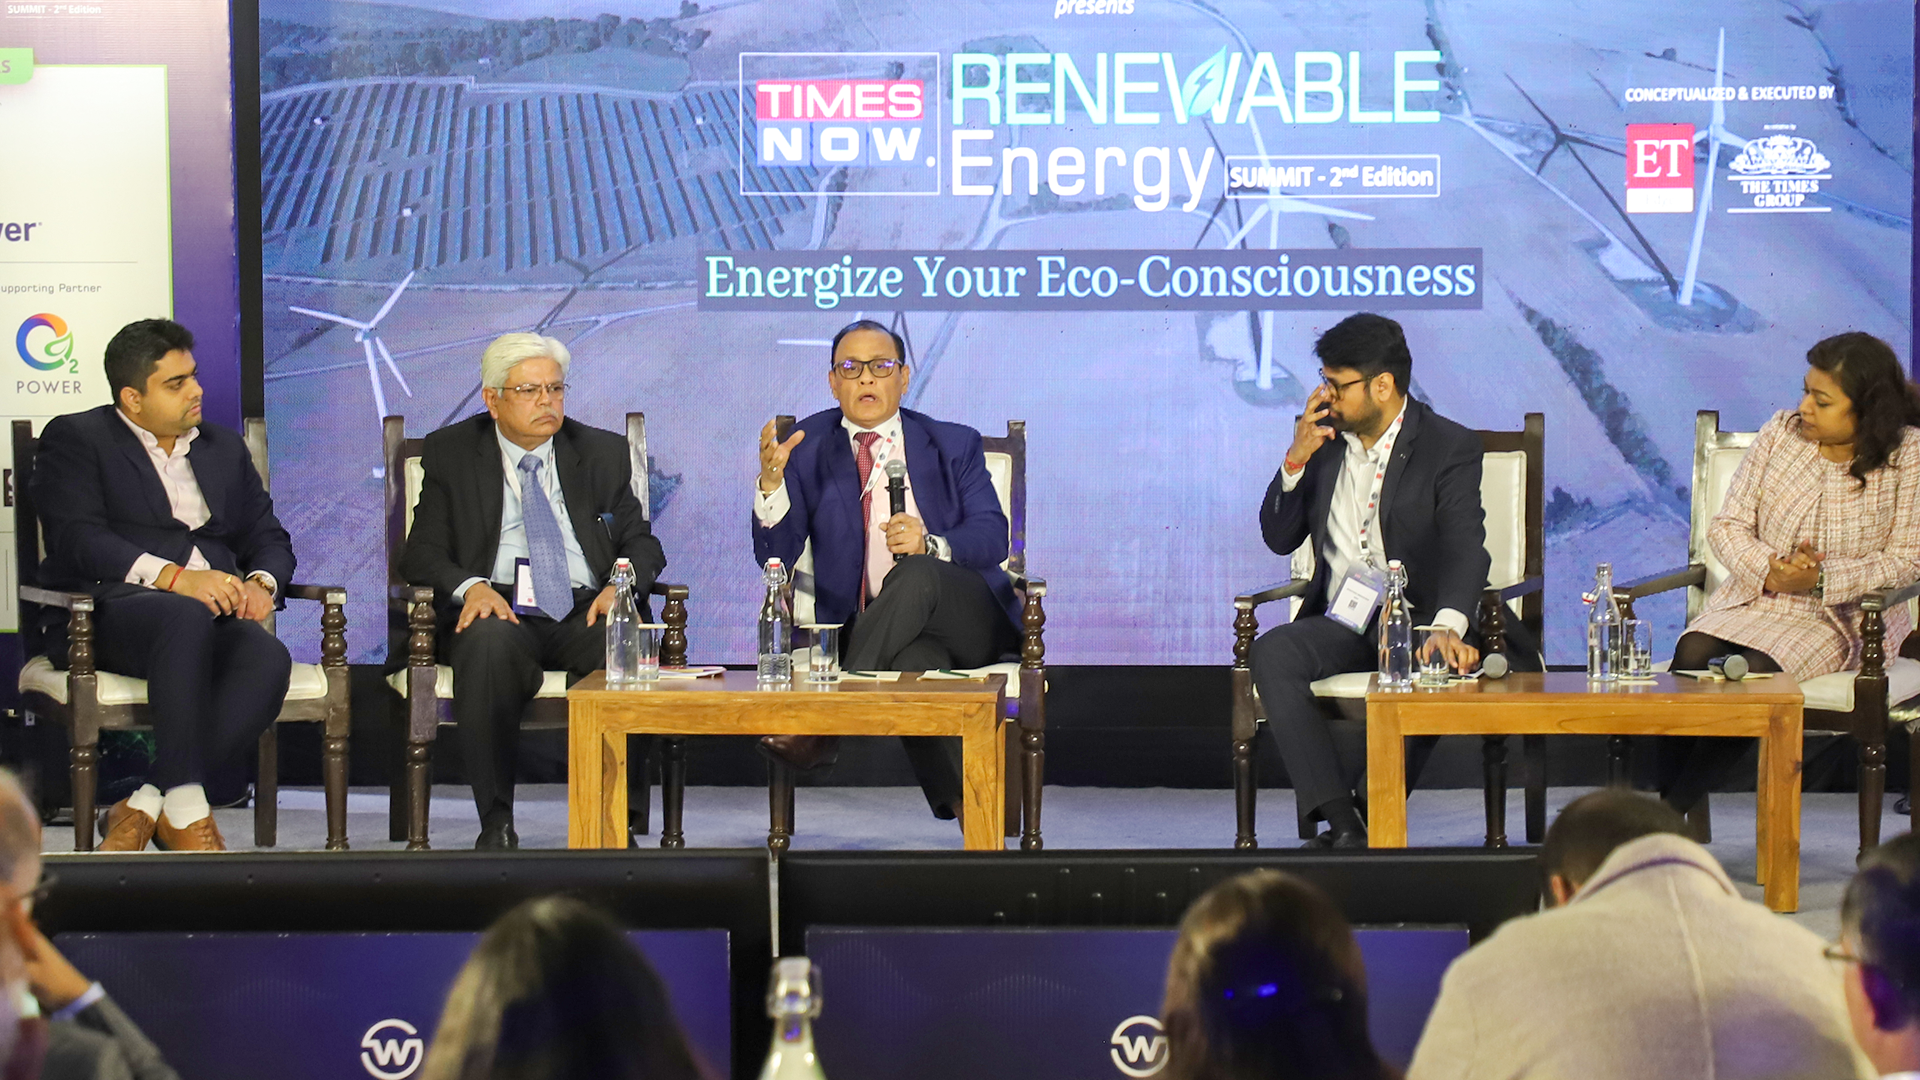 short essay on india's road map to renewable energy